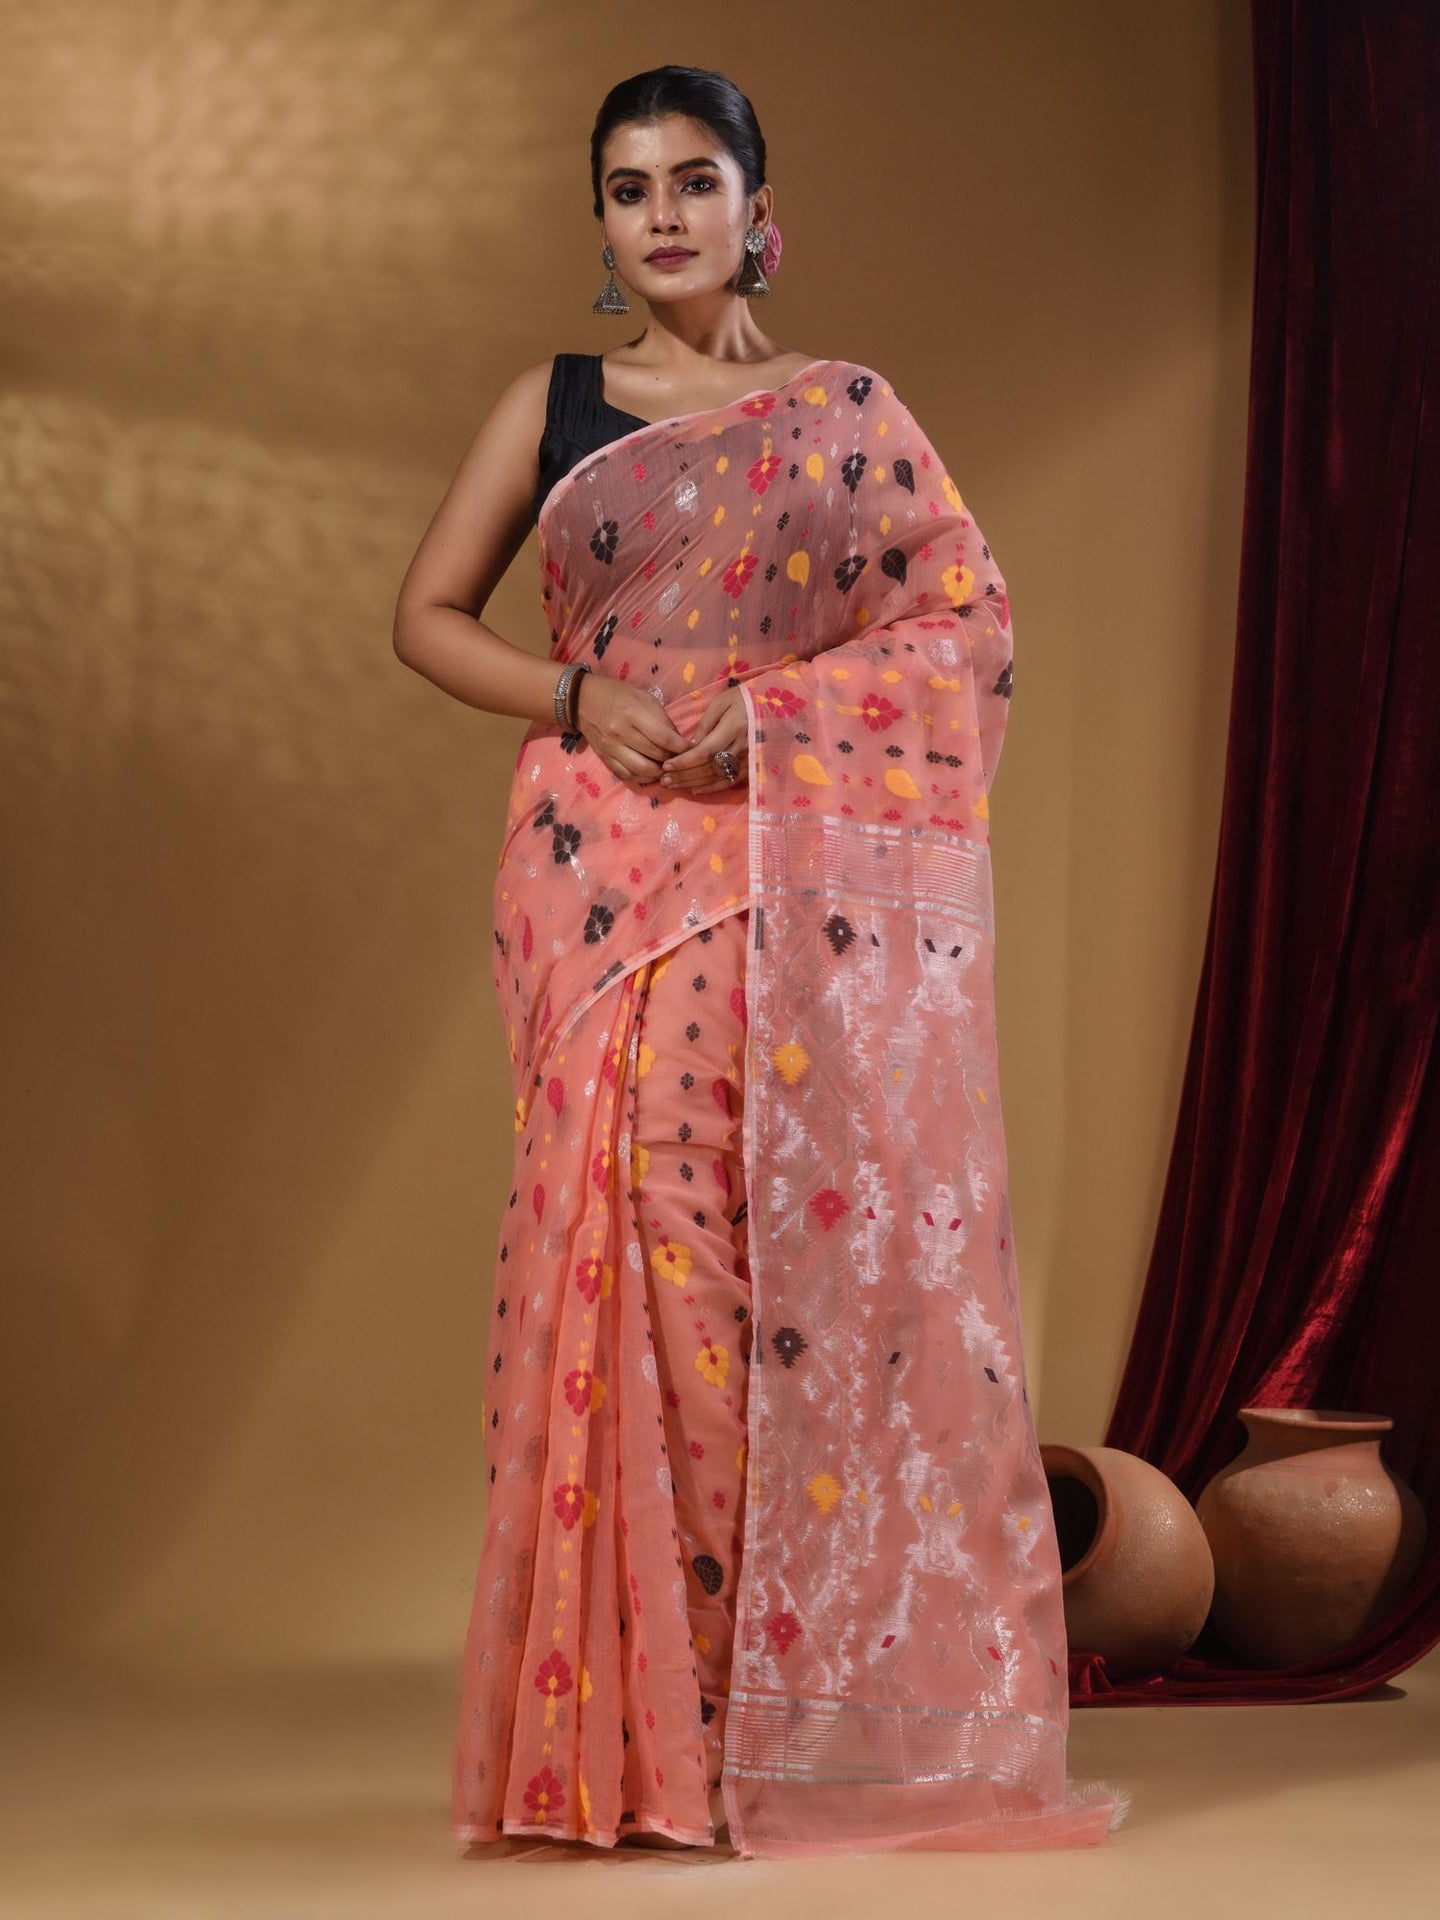 Watermelon Pink Cotton Handwoven Jamdani Saree With Multicolor Woven Designs And Motifs